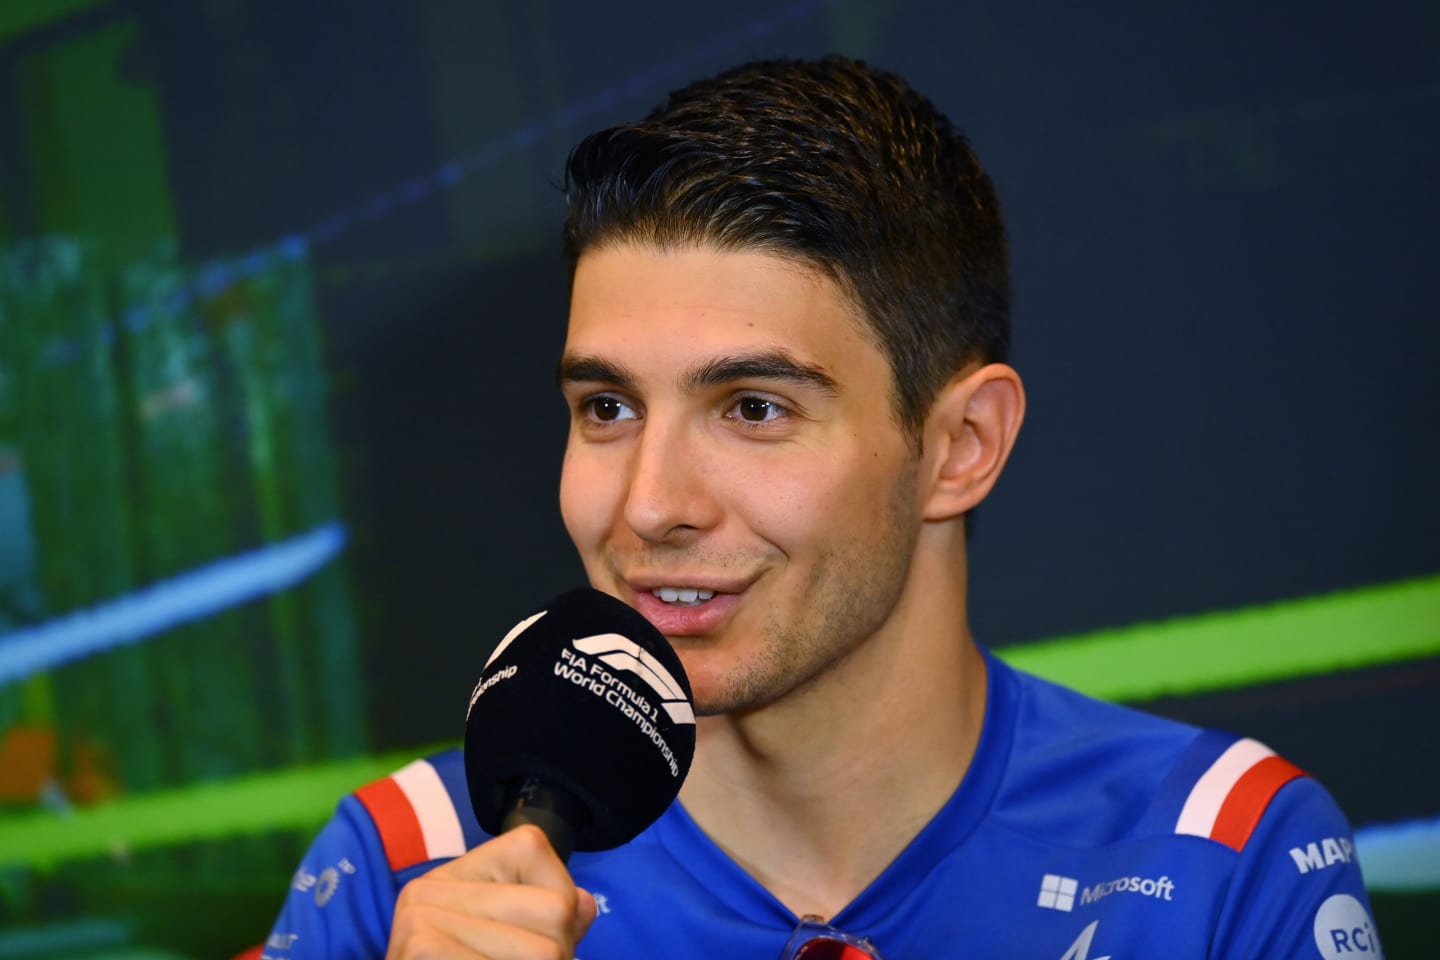 BAKU, AZERBAIJAN - JUNE 10: Esteban Ocon of France and Alpine F1 talks in the Drivers Press Conference prior to practice ahead of the F1 Grand Prix of Azerbaijan at Baku City Circuit on June 10, 2022 in Baku, Azerbaijan. (Photo by Dan Mullan/Getty Images)